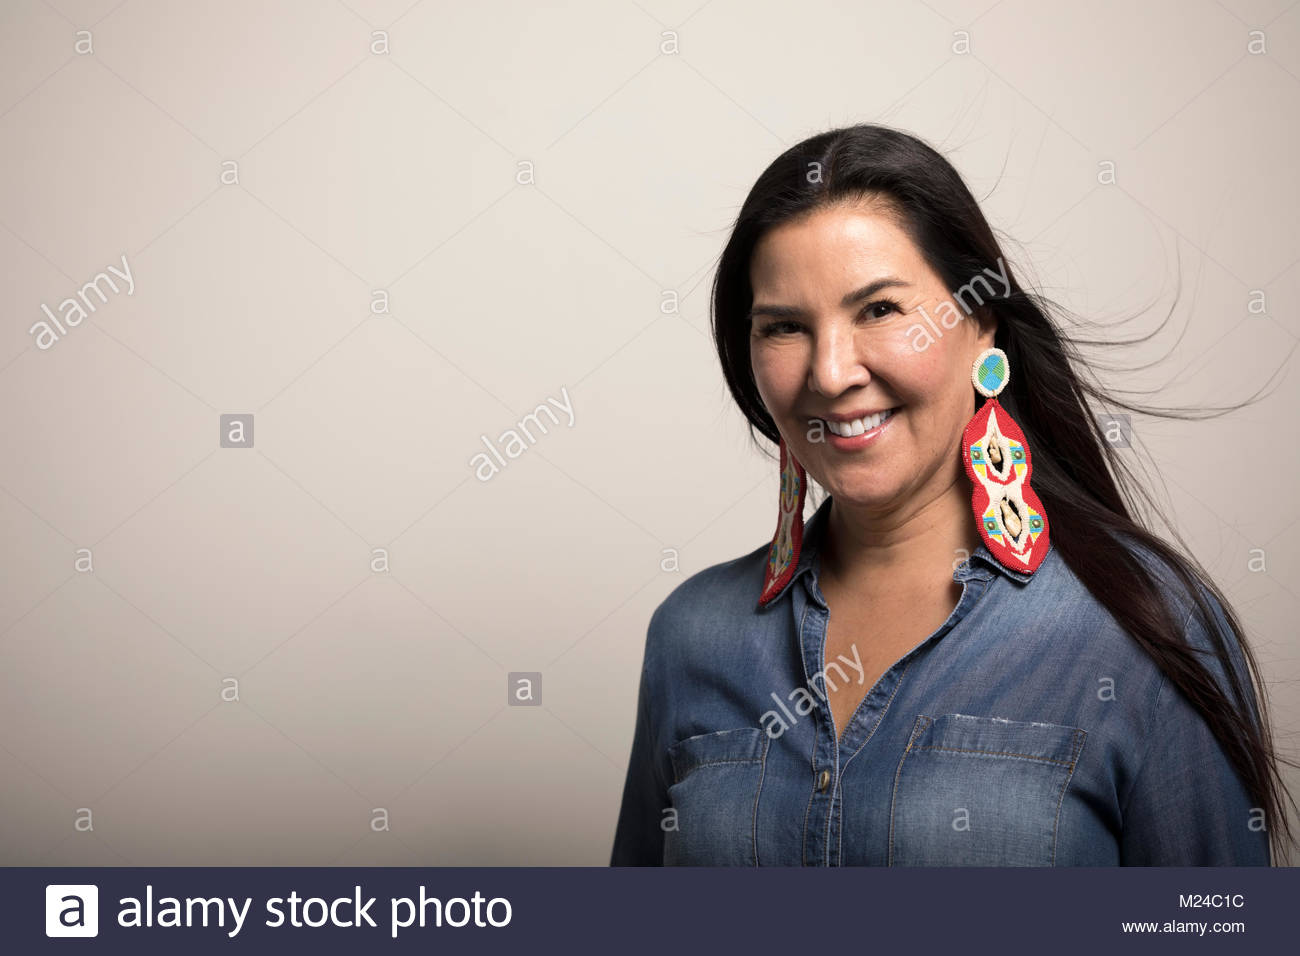 Portrait smiling, confident mature Native American woman with colorful earrings Stock Photo